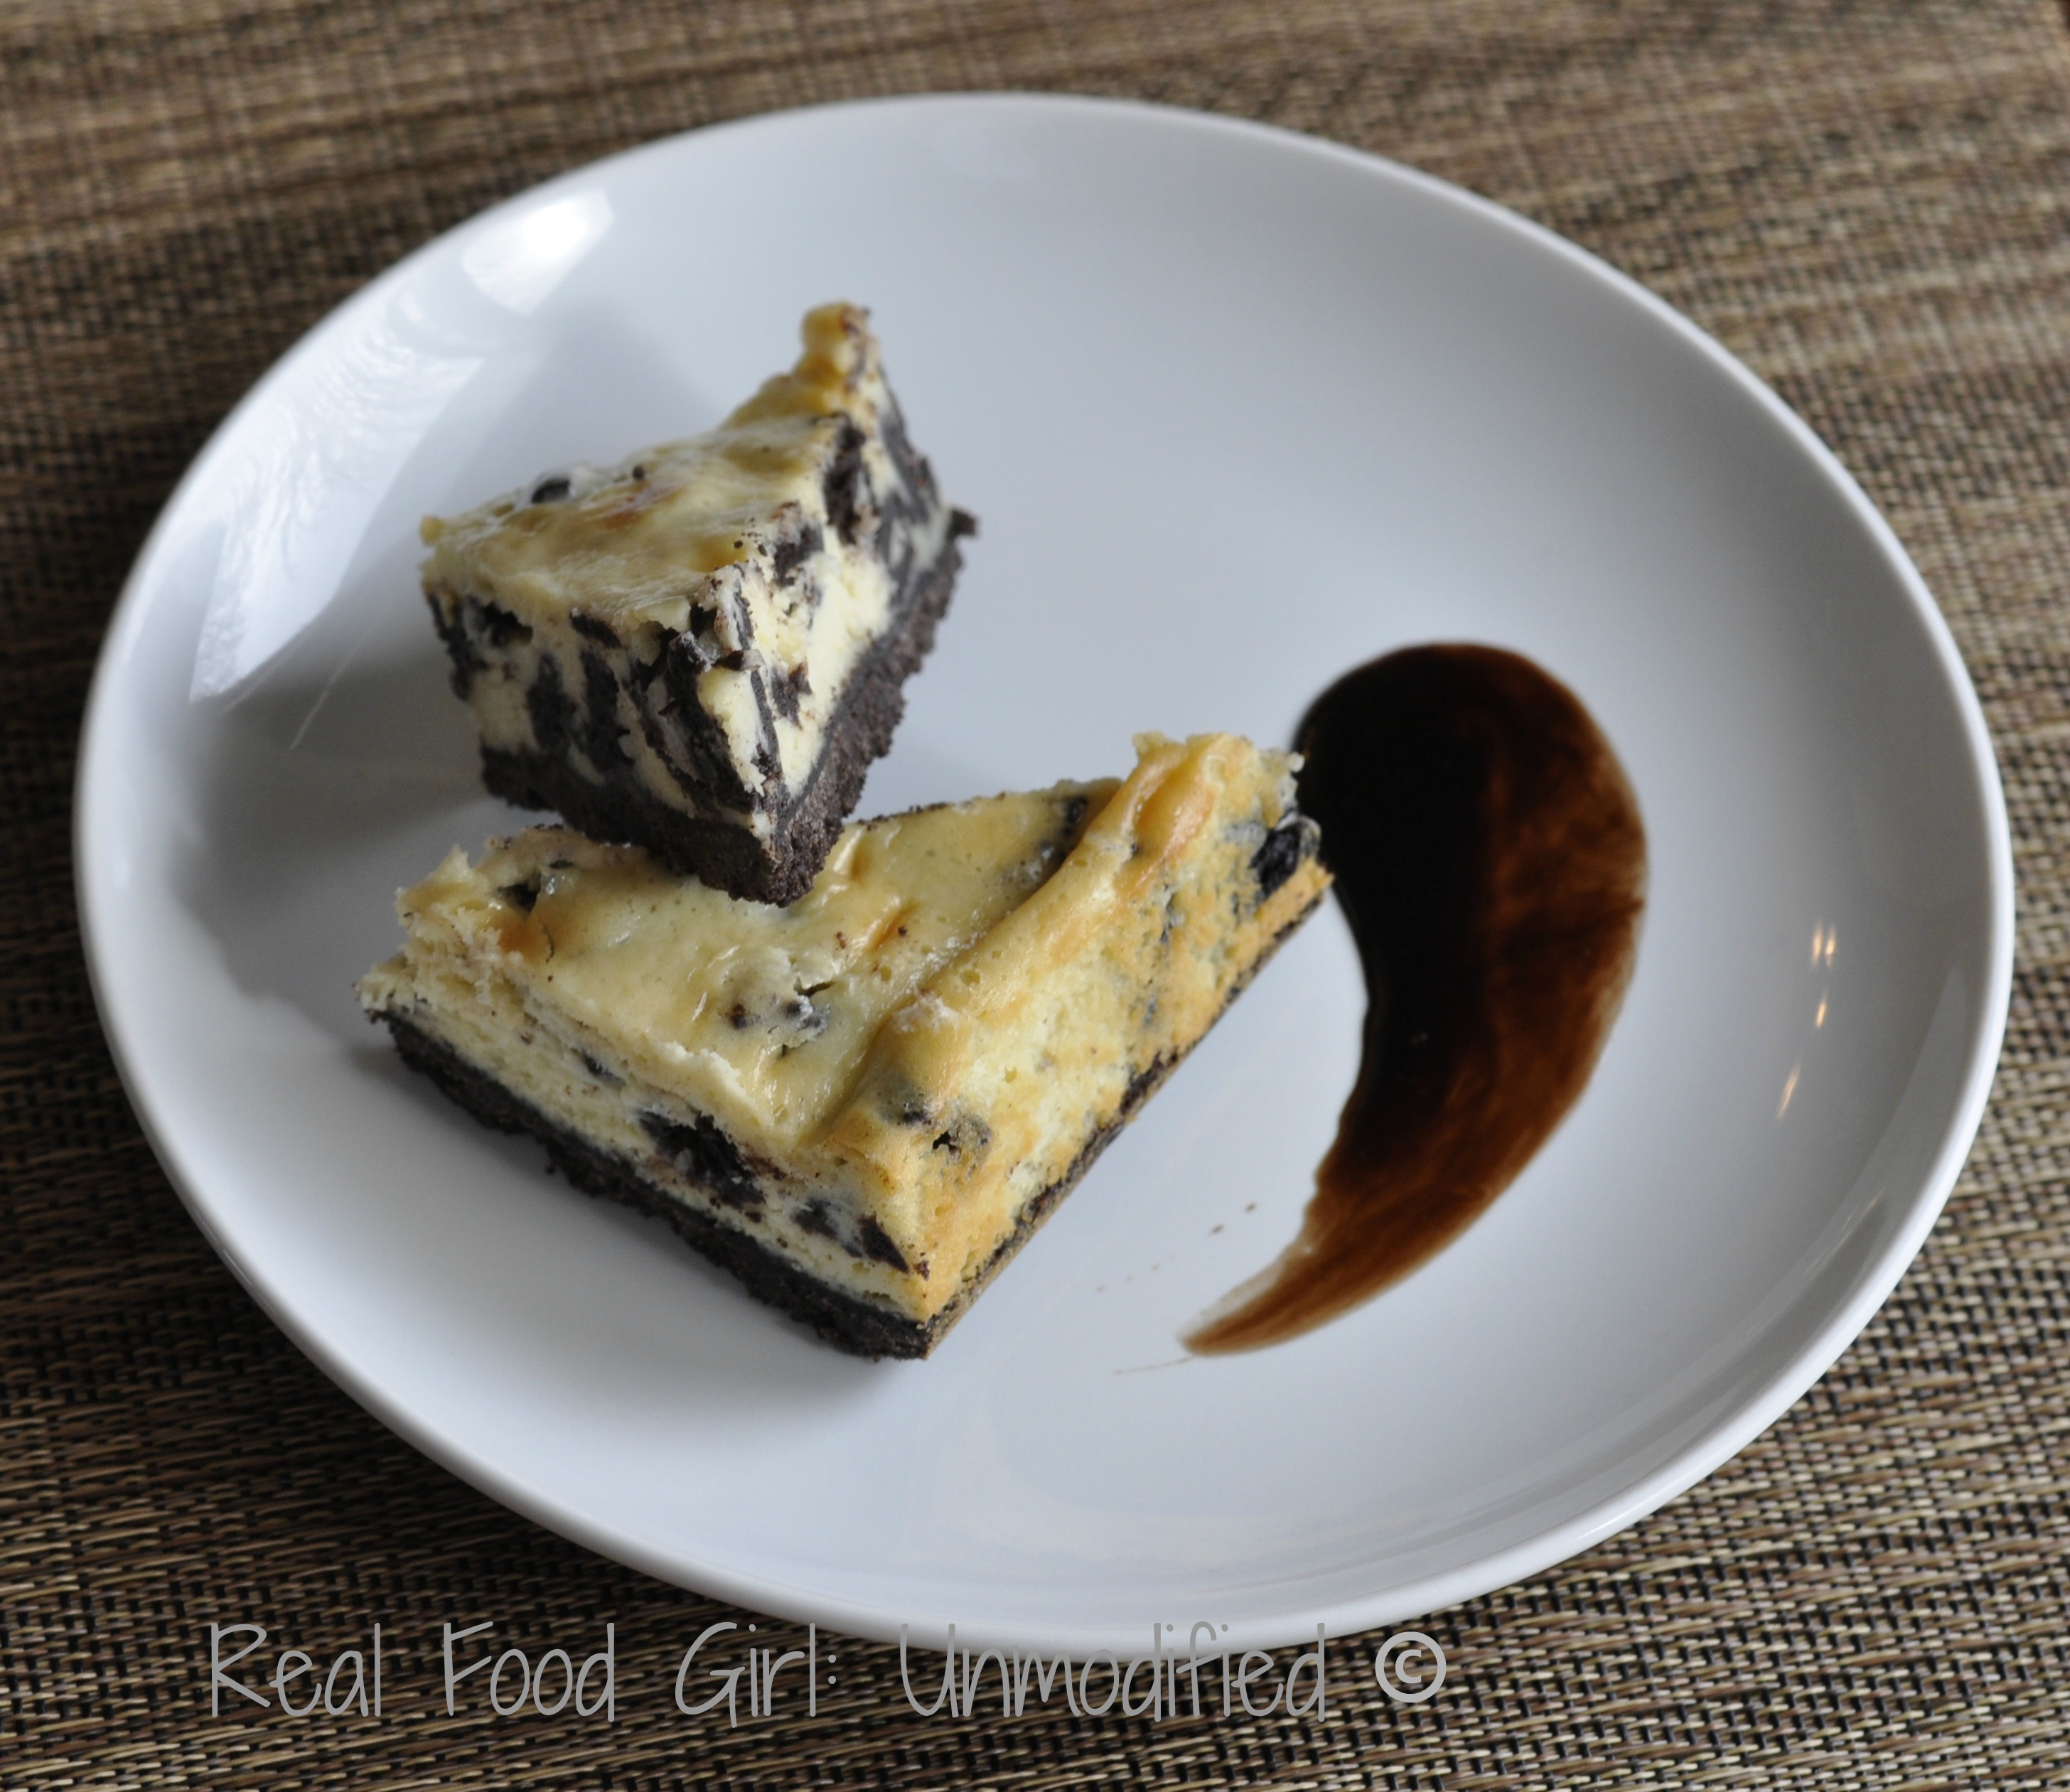 Faux-reo Cheesecake Bars. Because even REAL food foodies need a treat once in a while! Happy Valentine's Day from Real Food Girl: Unmodified!